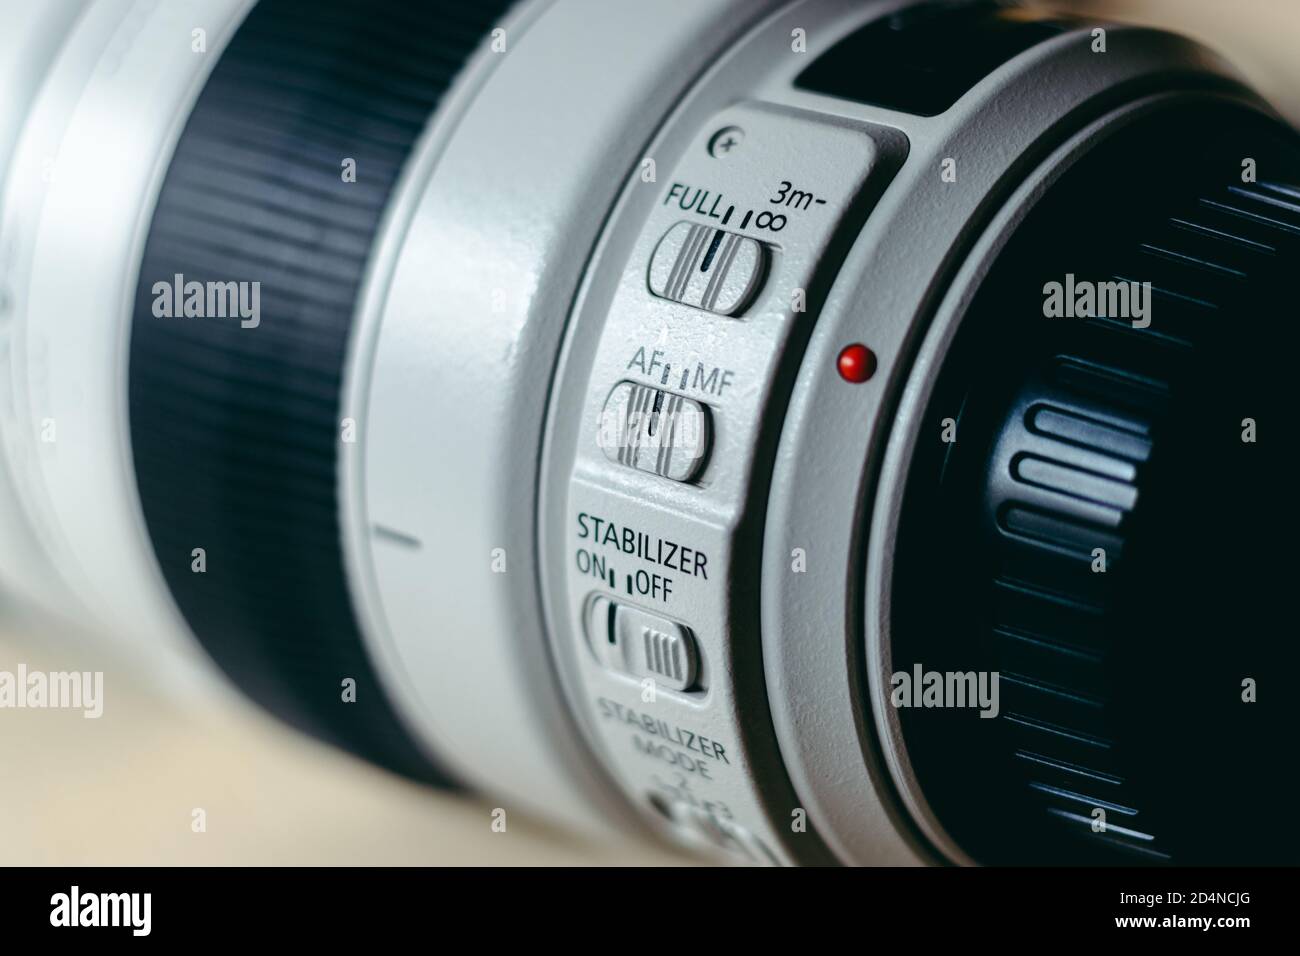 Canon telephoto zoom lens 100-400 millimeter with control switches in close up view. Stock Photo